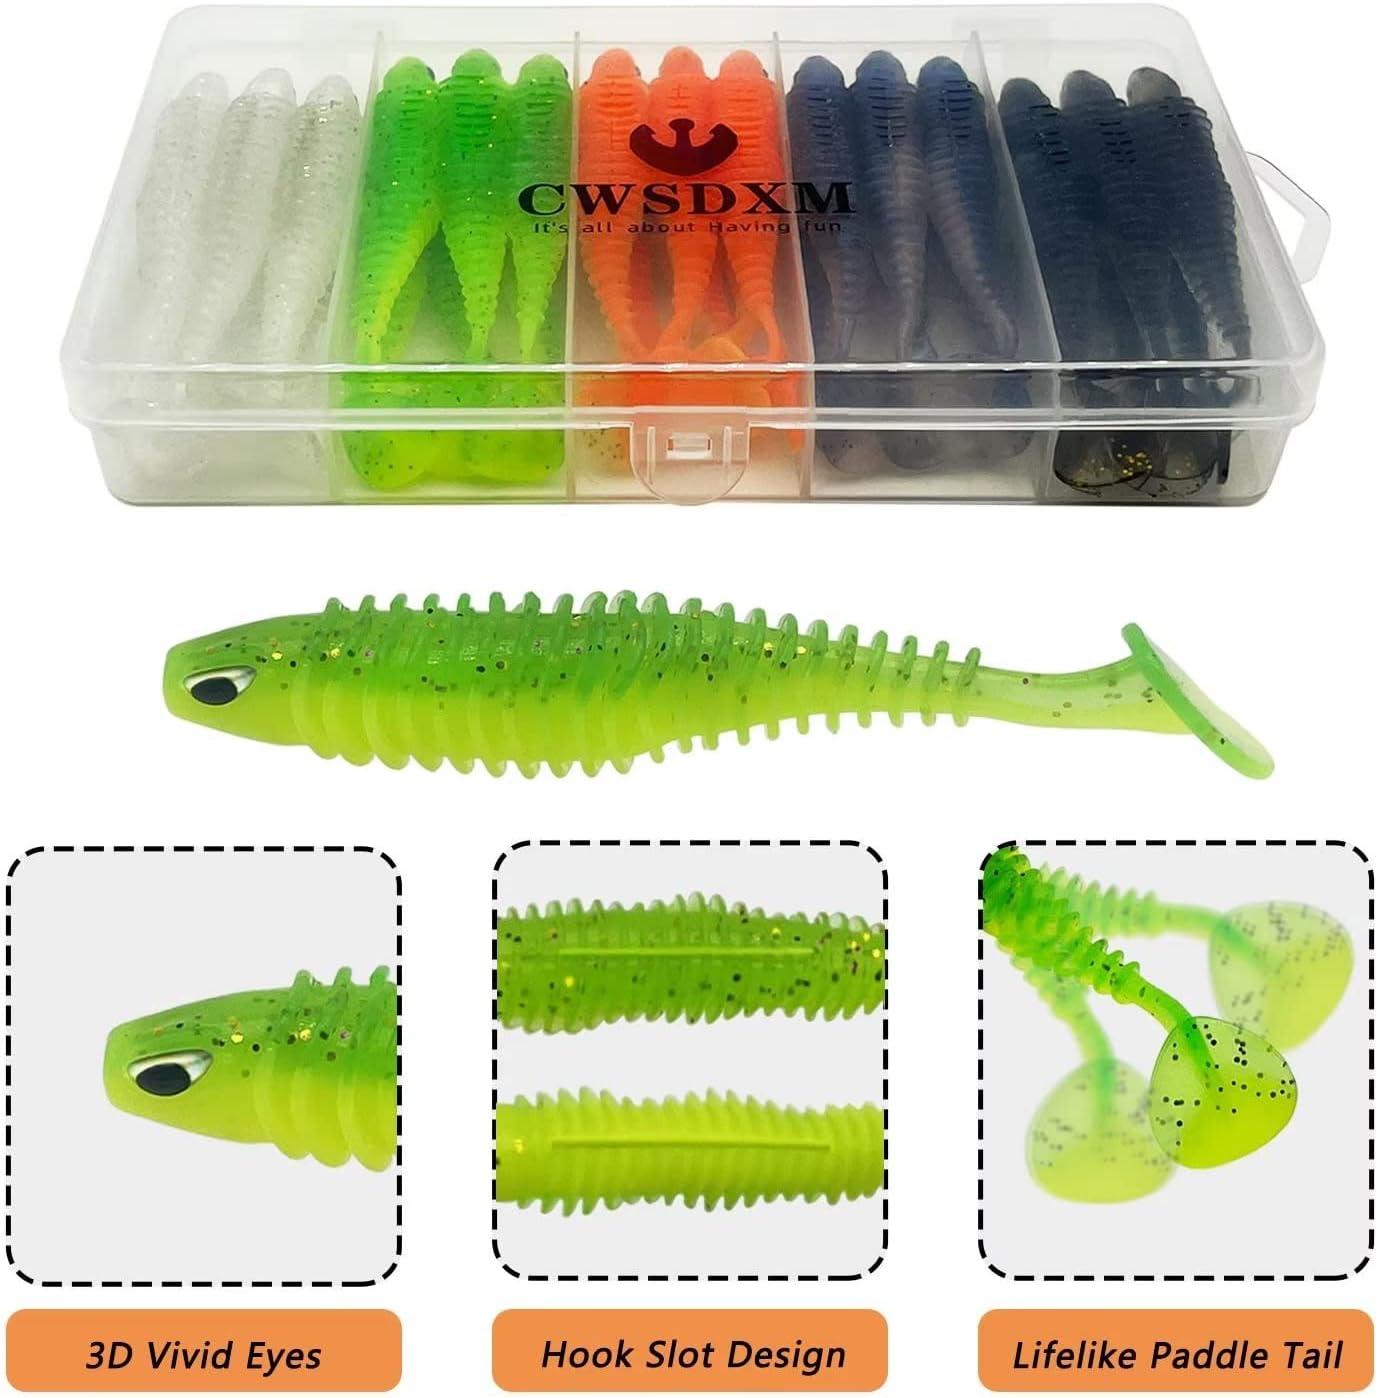 Rosewood 32pcs Paddle Tail Swimbaits Lure Soft Plastic Fishing Lures Kit  Bass Fishing Bait For Freshwater And Saltwater With Box - Fishing Lures -  AliExpress